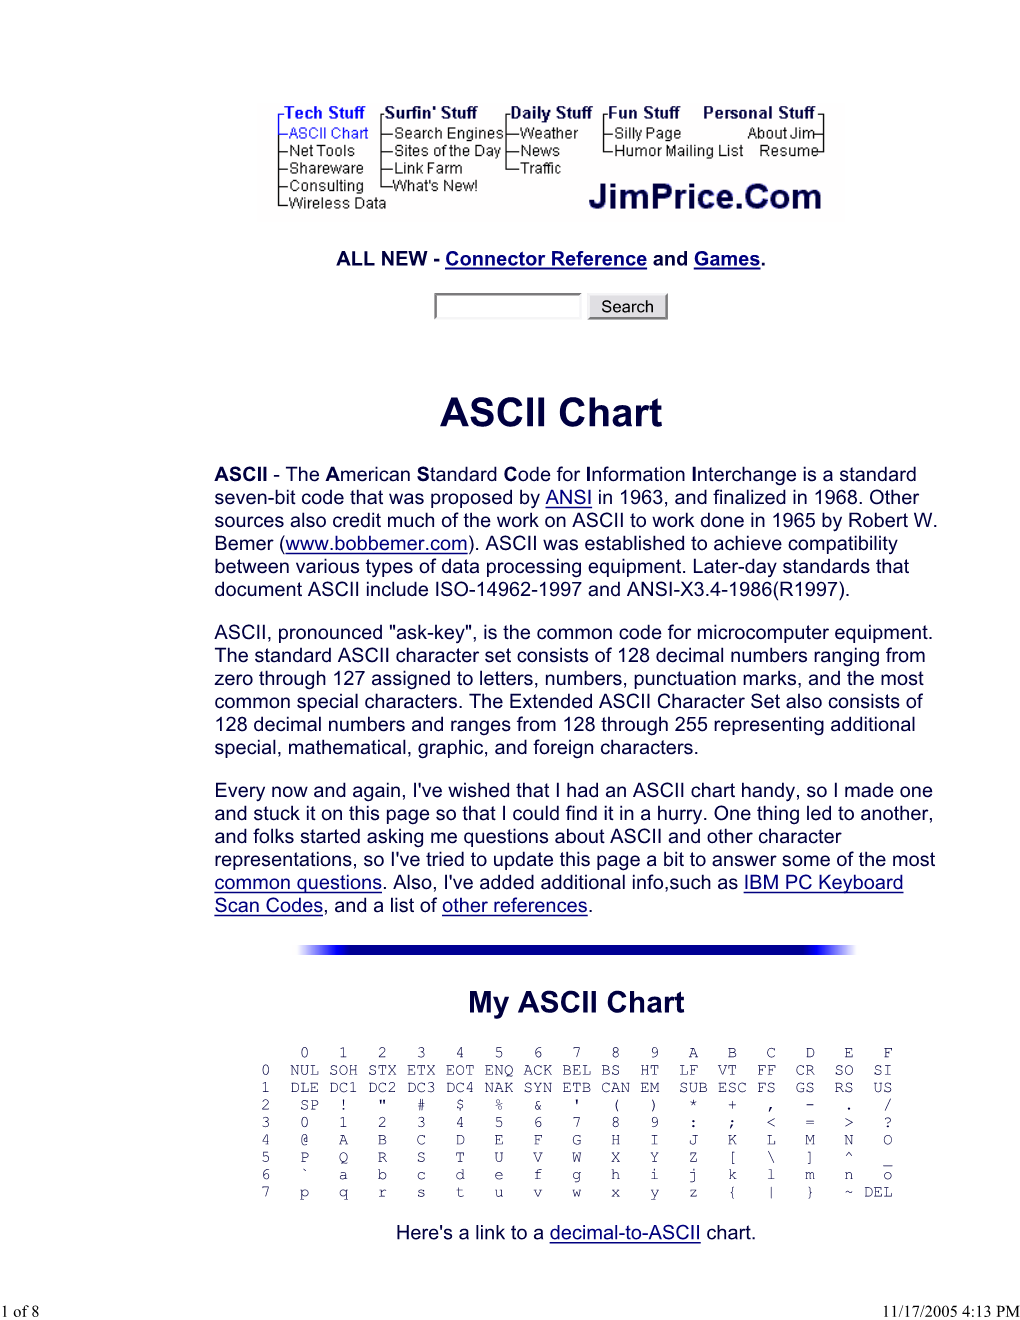 ASCII Chart and Other Resources